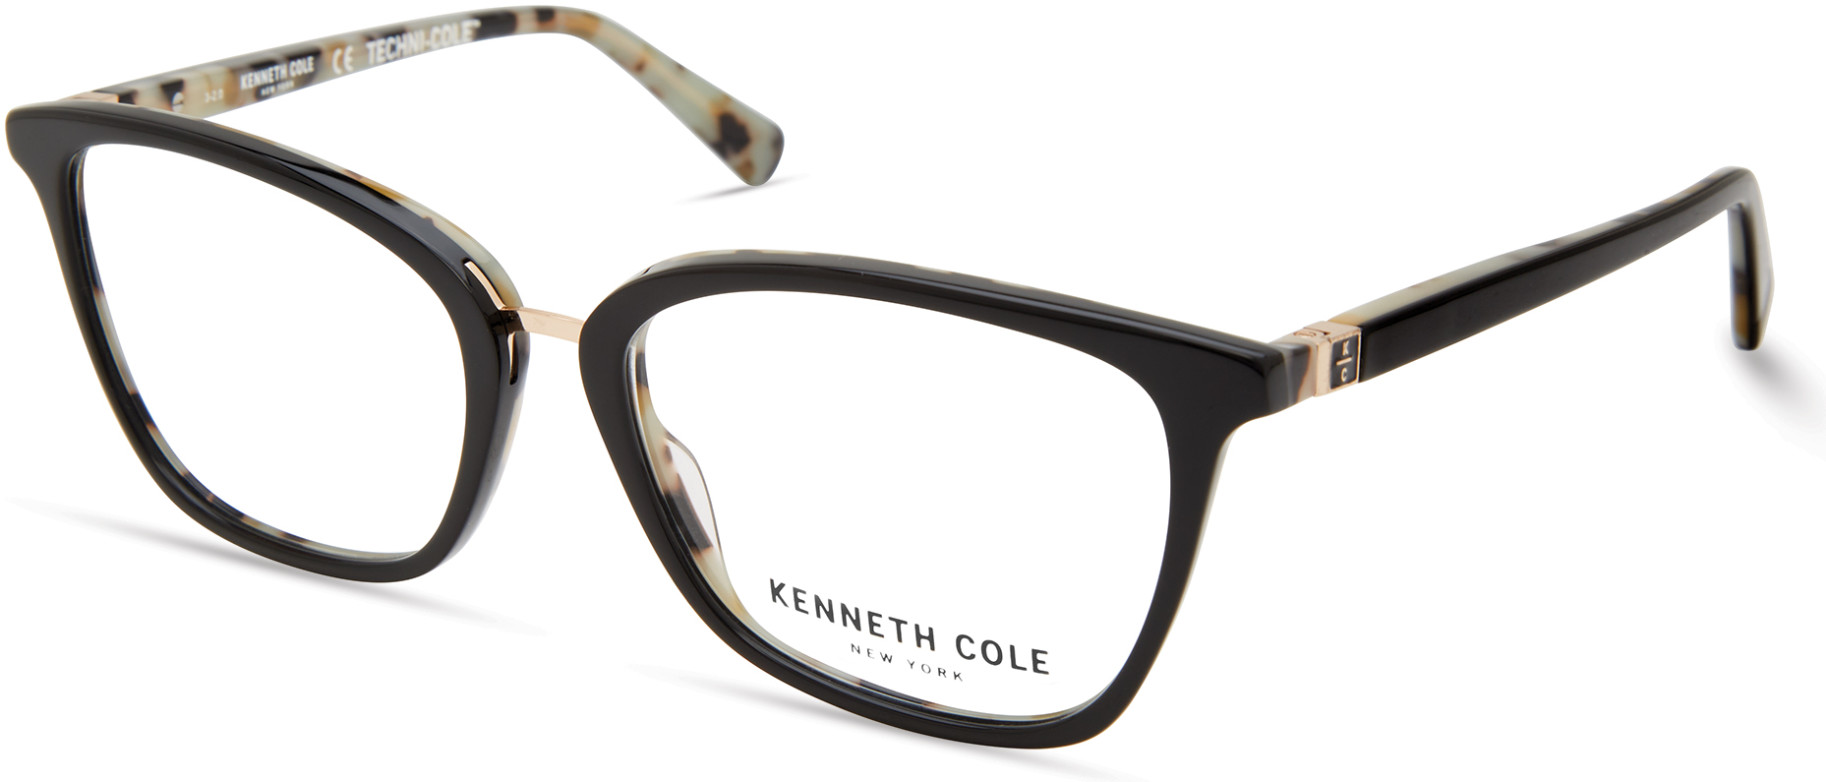 KENNETH COLE NY 0328